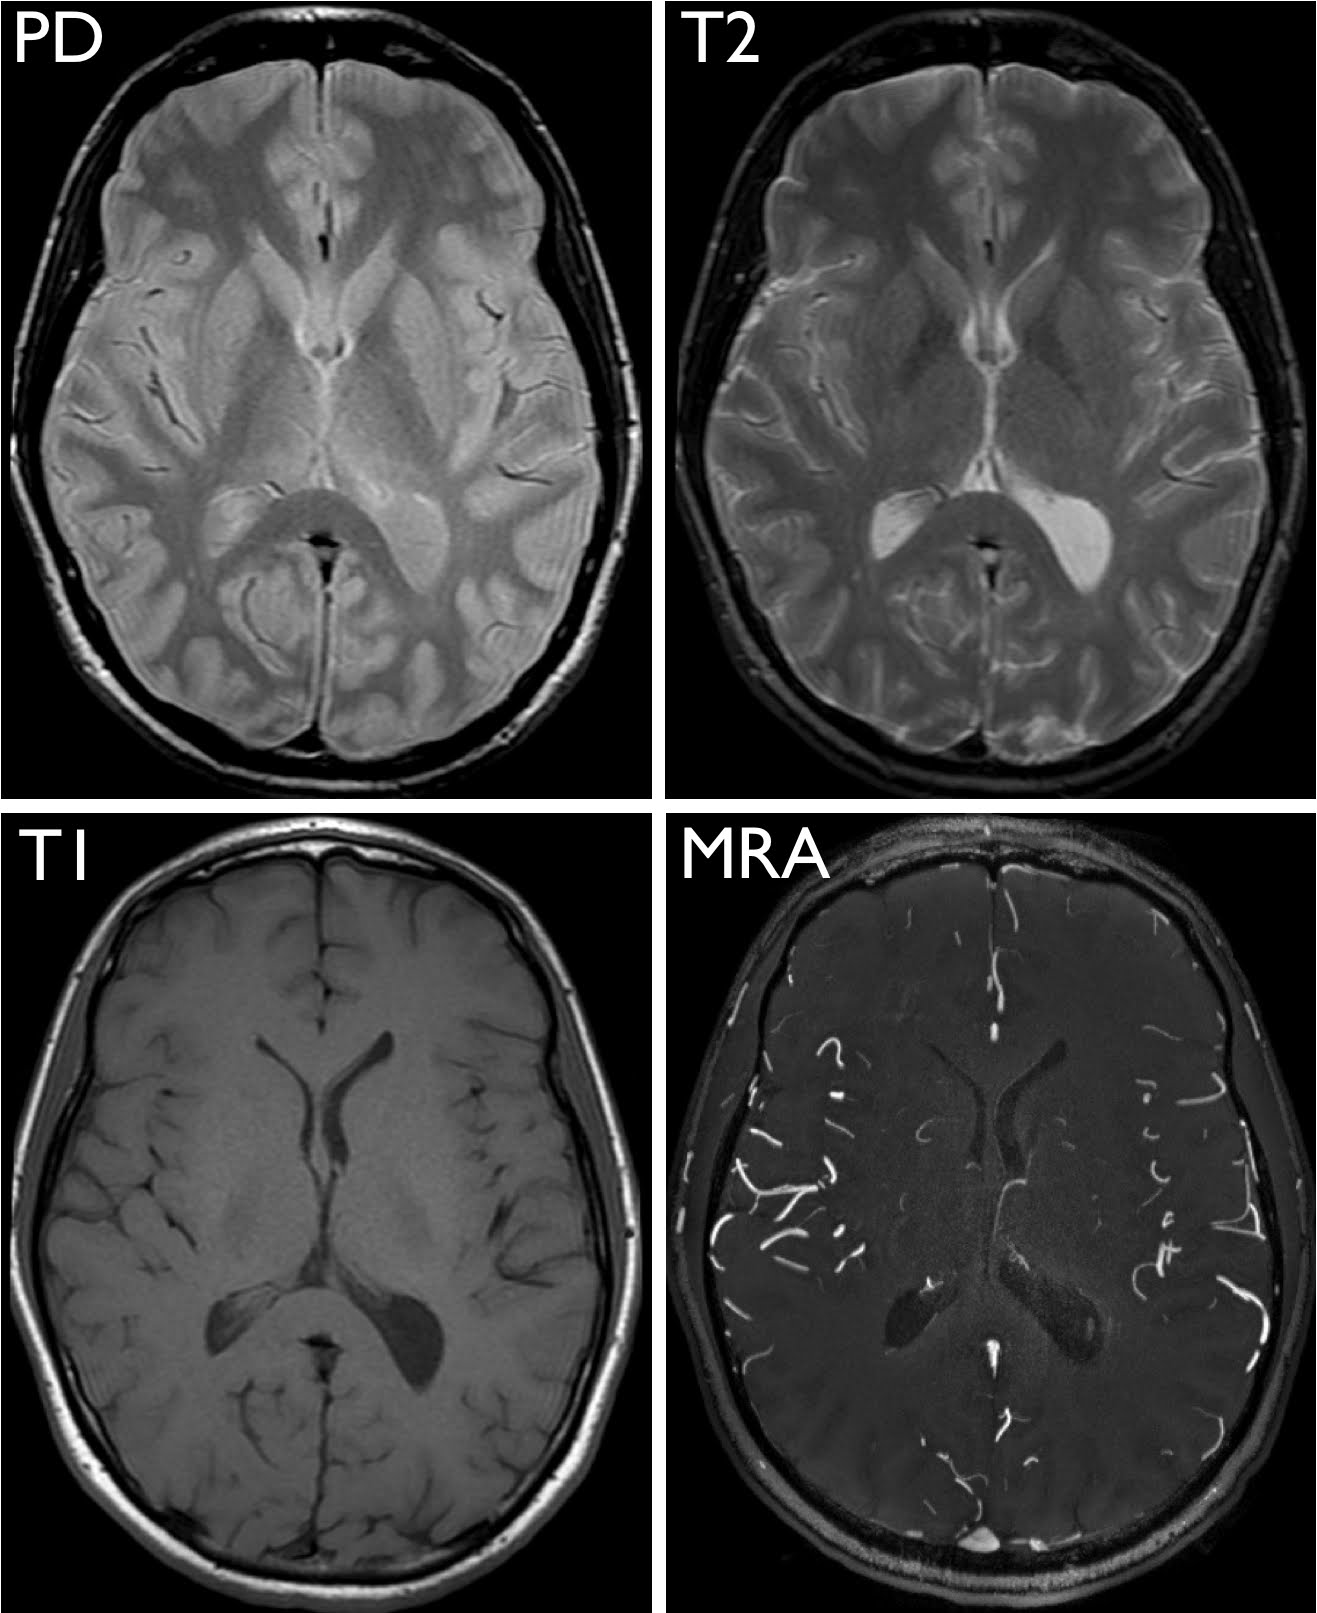 mri images of the brain